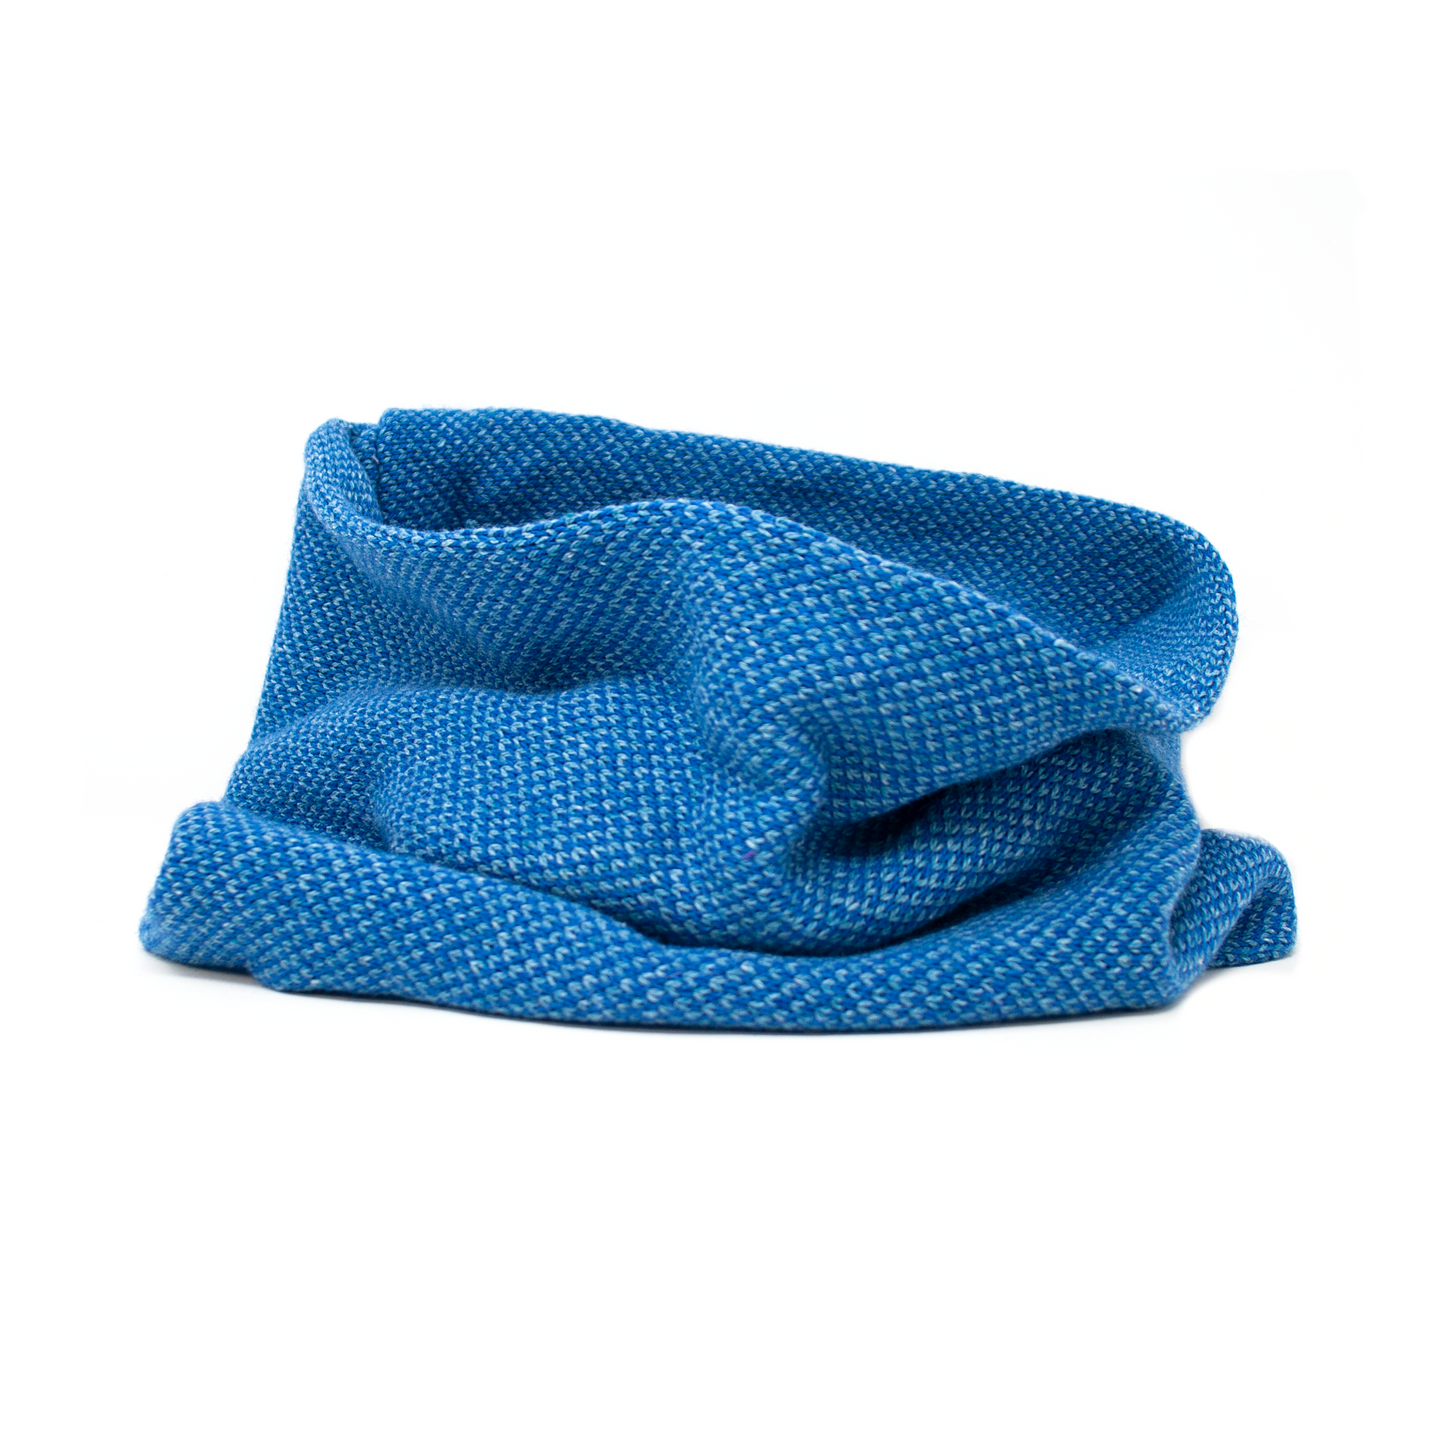 Royal Blue & Turquoise - Harris Design - Luxury Knitted Snood